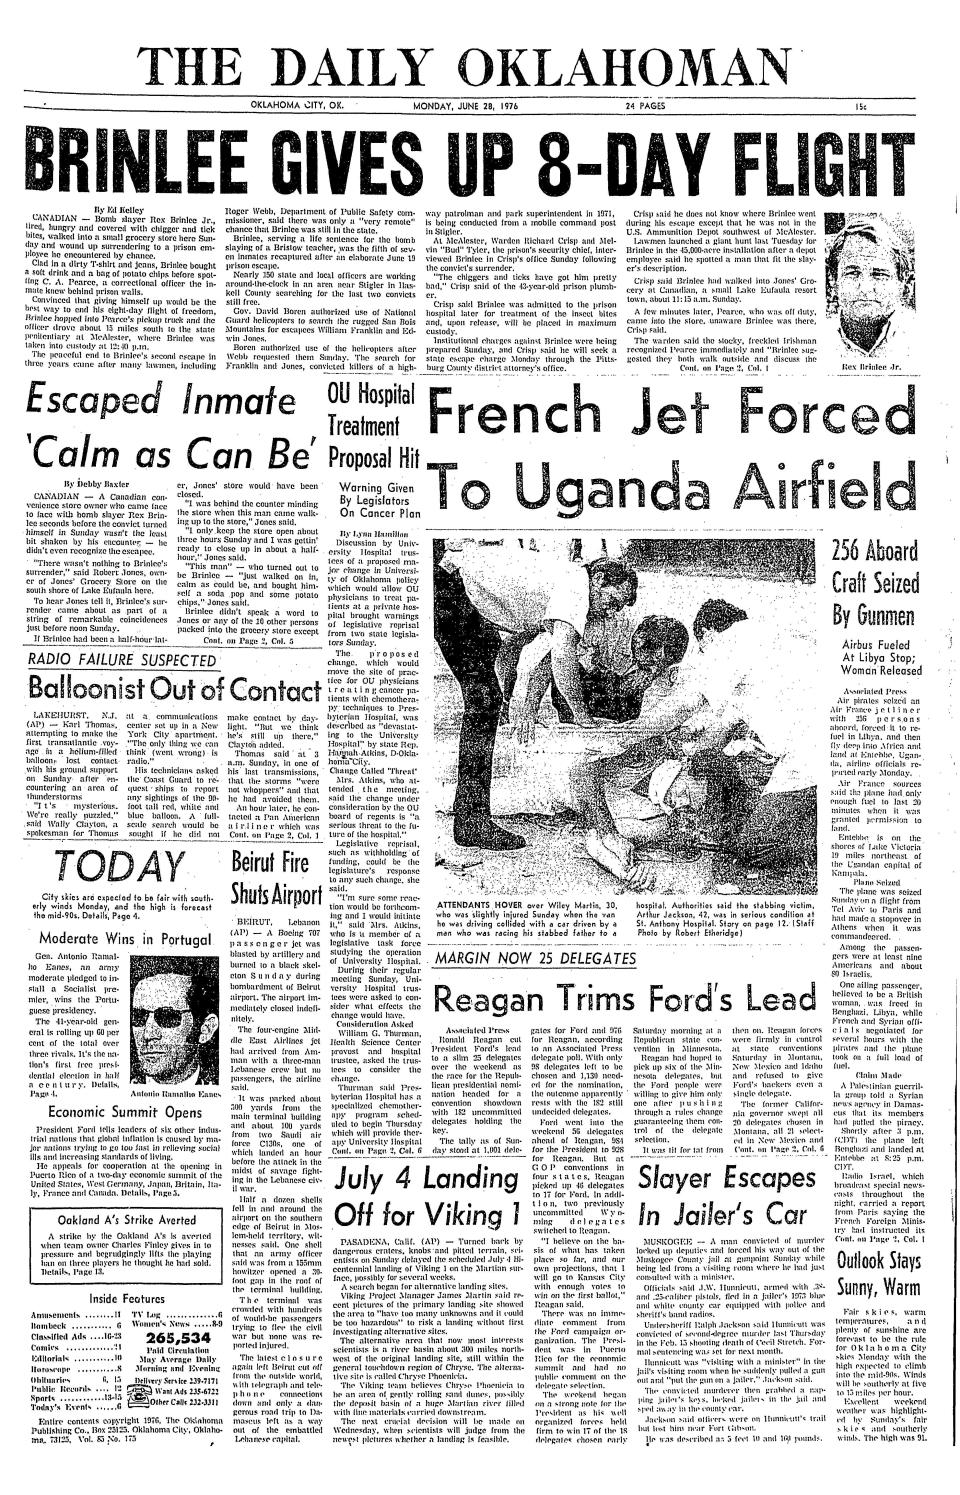 The headline "BRINLEE GIVES UP 8-DAY FLIGHT" spread across the top of the June 28, 1976, edition of The Daily Oklahoman.